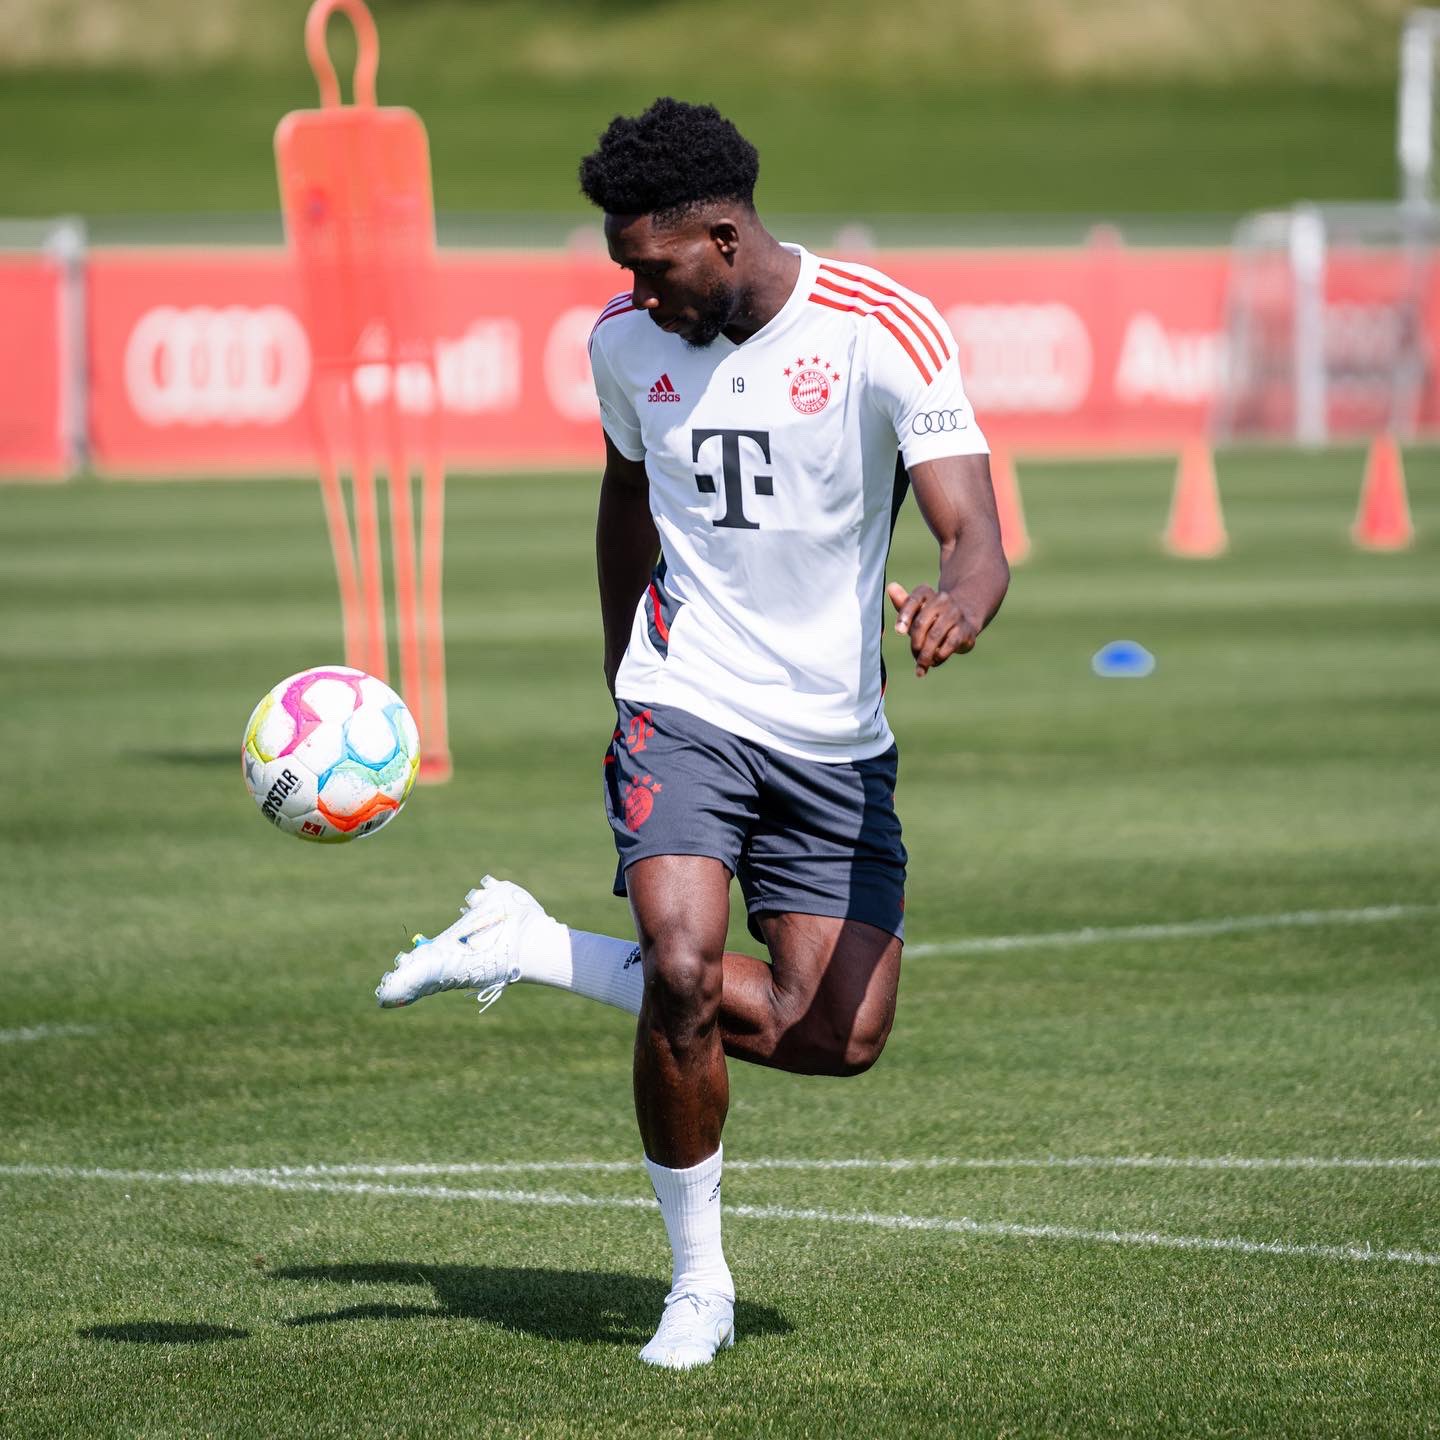 Is Jordyn Huitema Single Or Still Dating Alphonso Davies In 2022? A Look Into Their Relationship Timeline